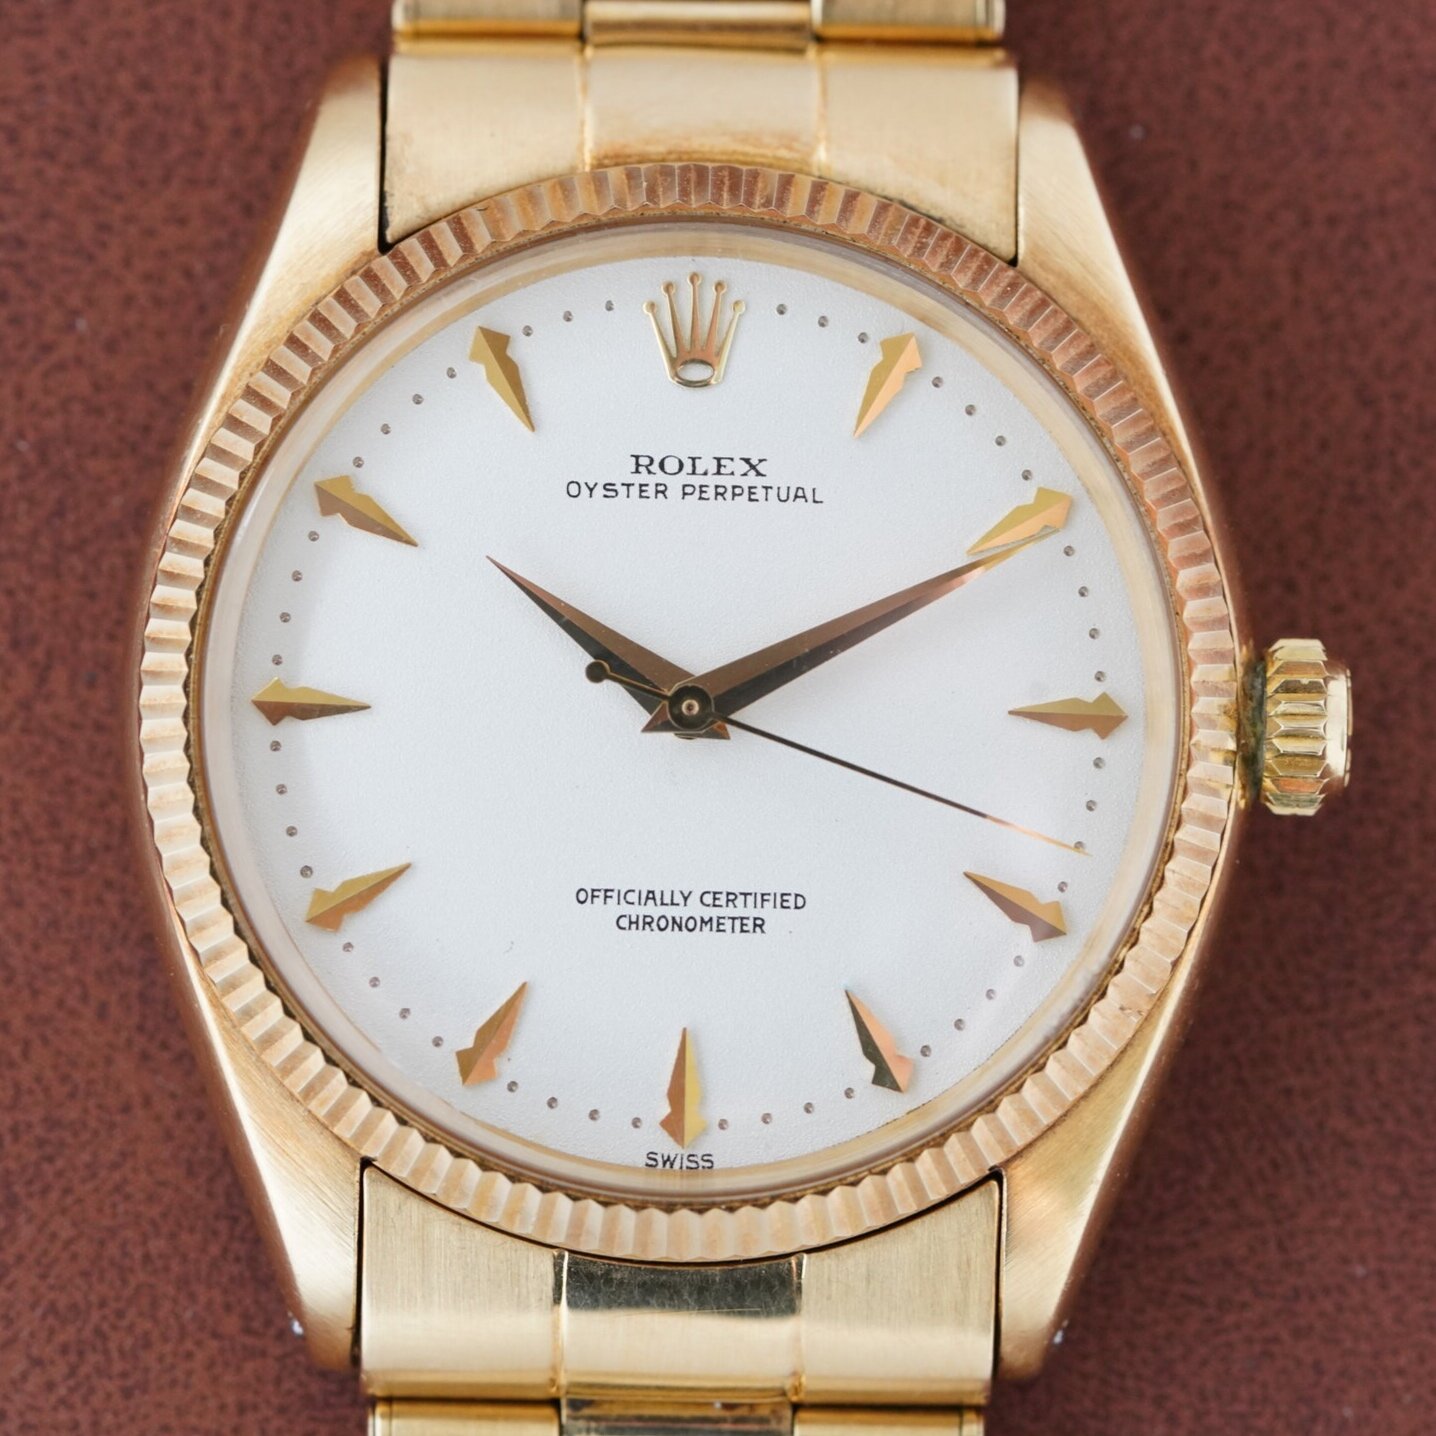 rolex officially certified chronometer